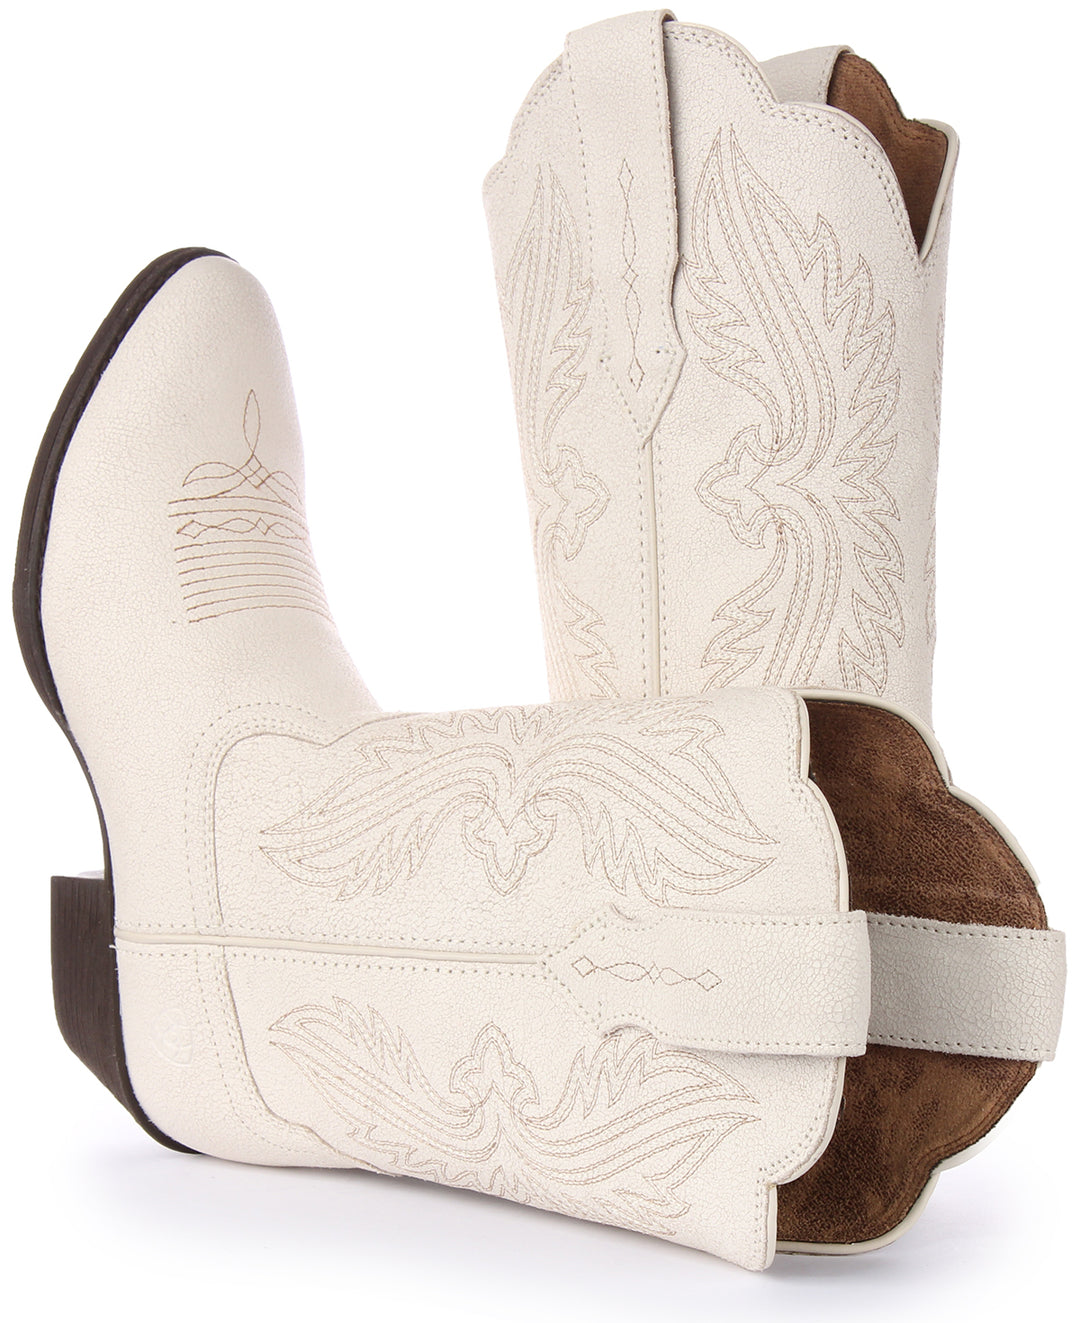 Ariat Heritage R Toe In Off White For Women